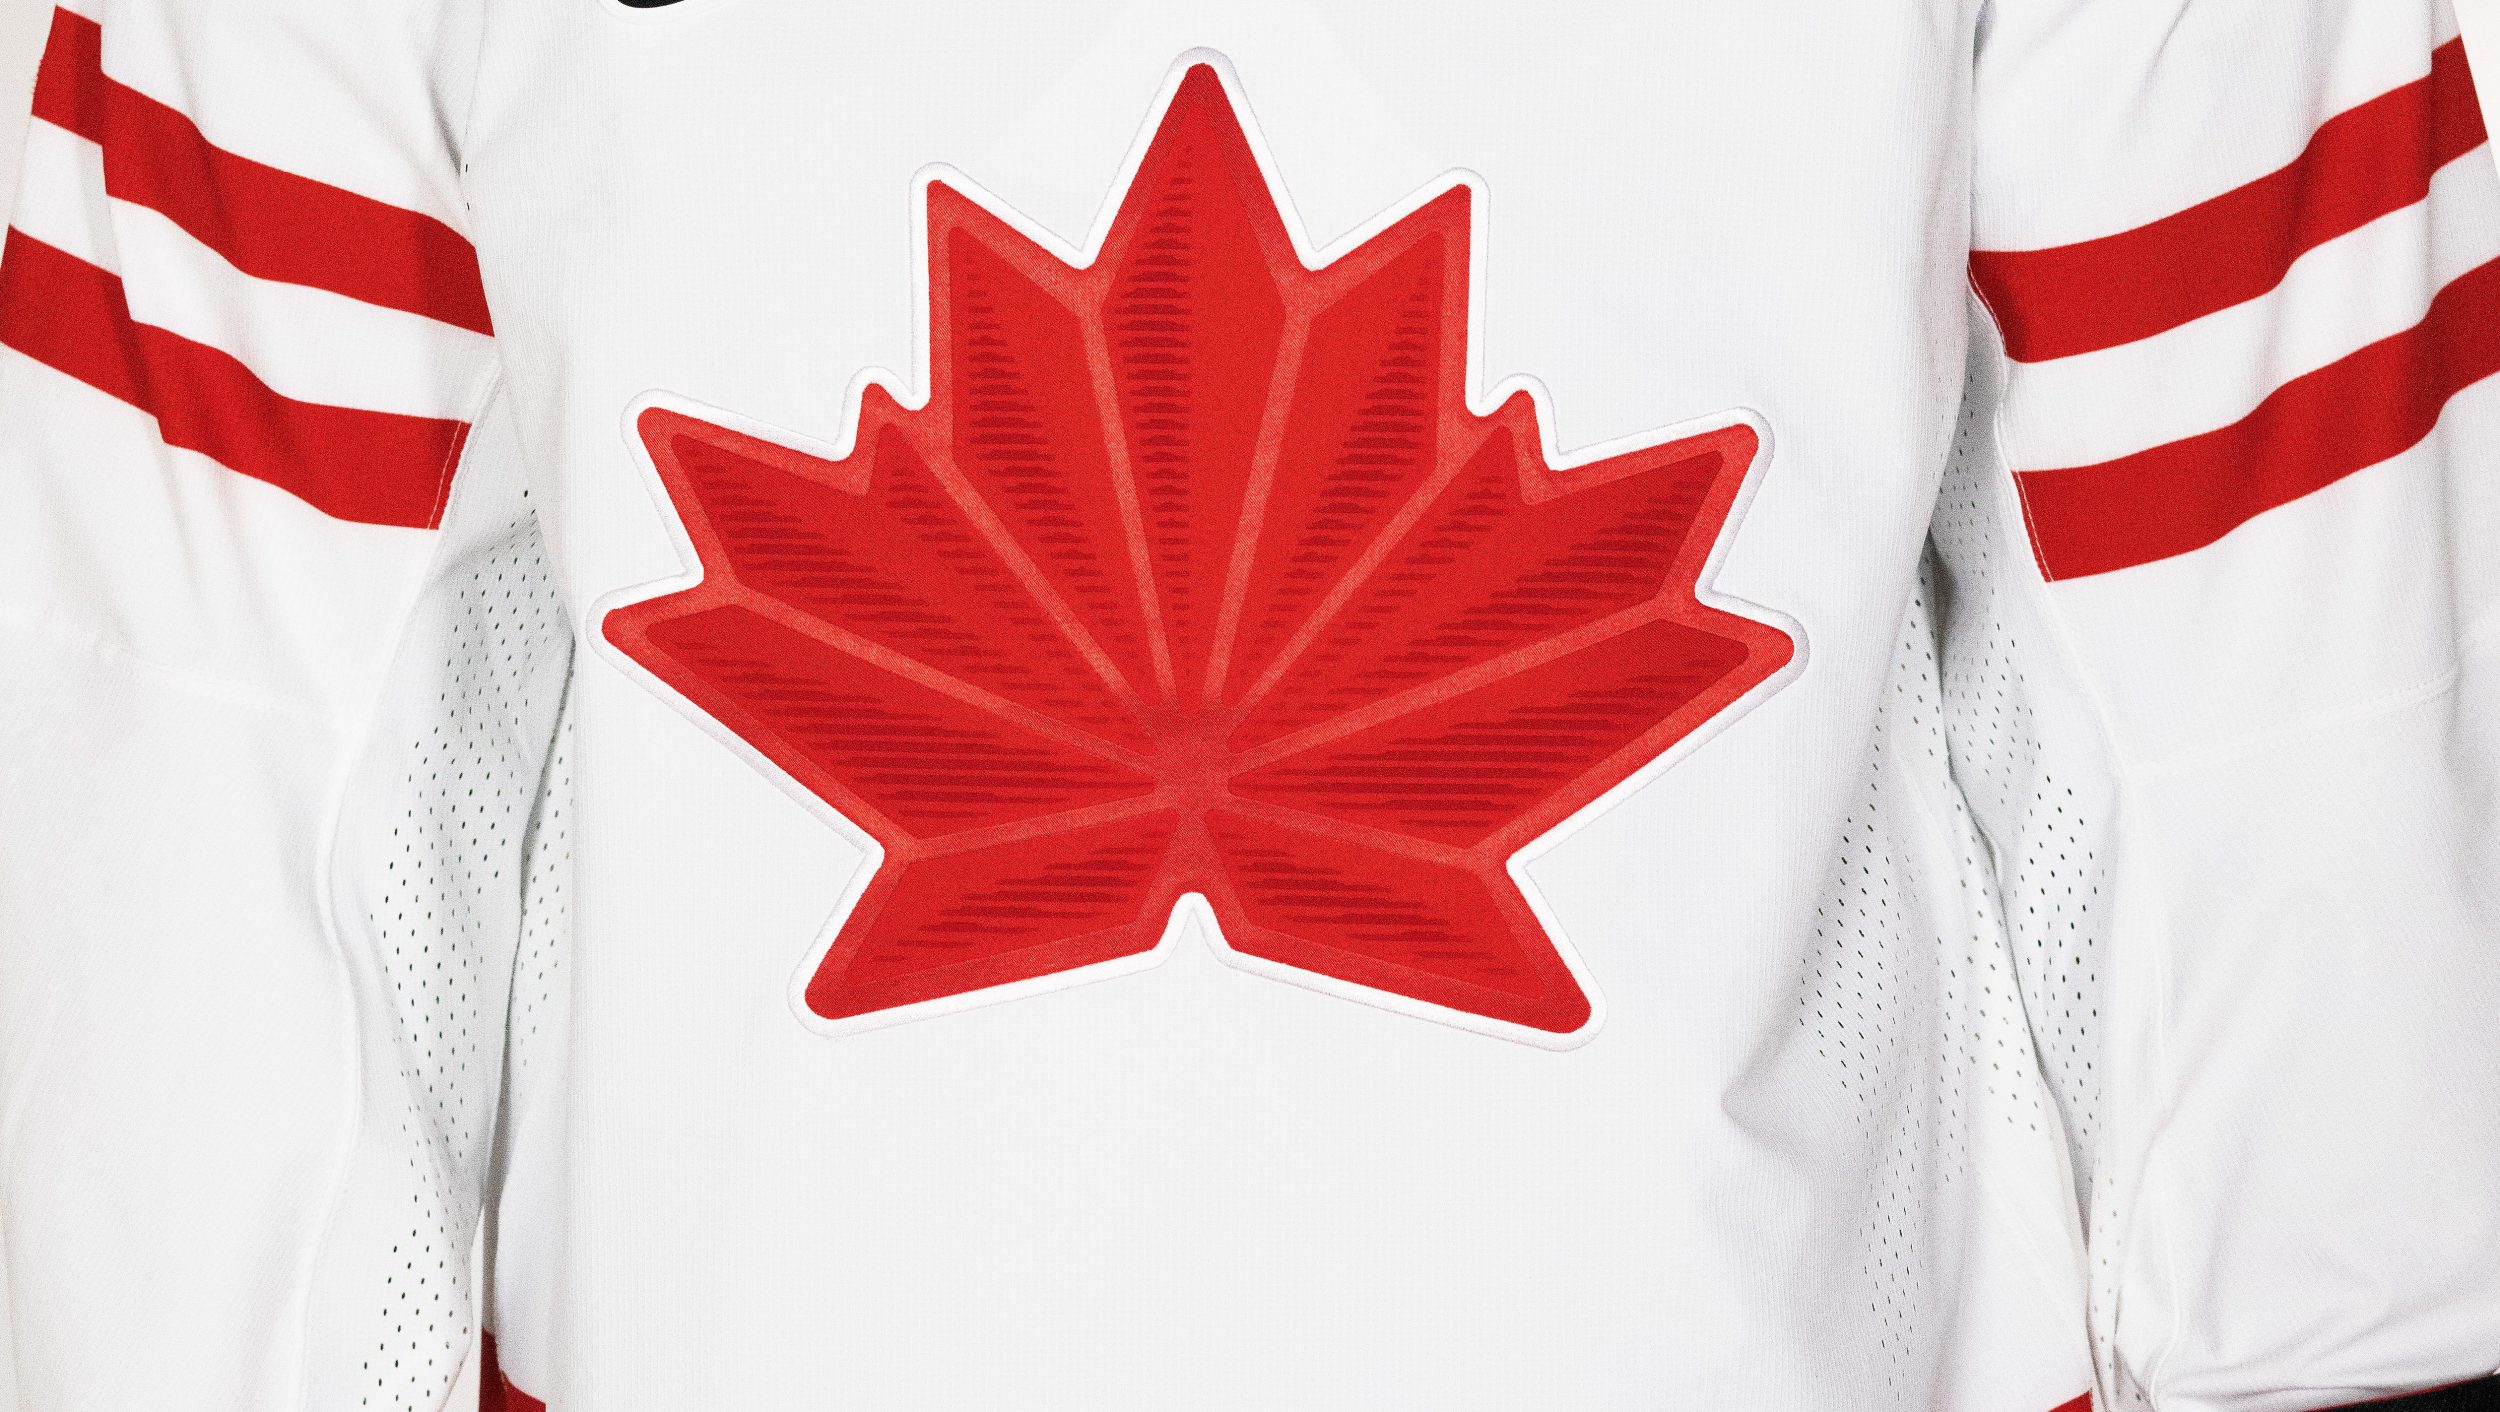 Canadian Olympic hockey jerseys for 2018 Games unveiled - The